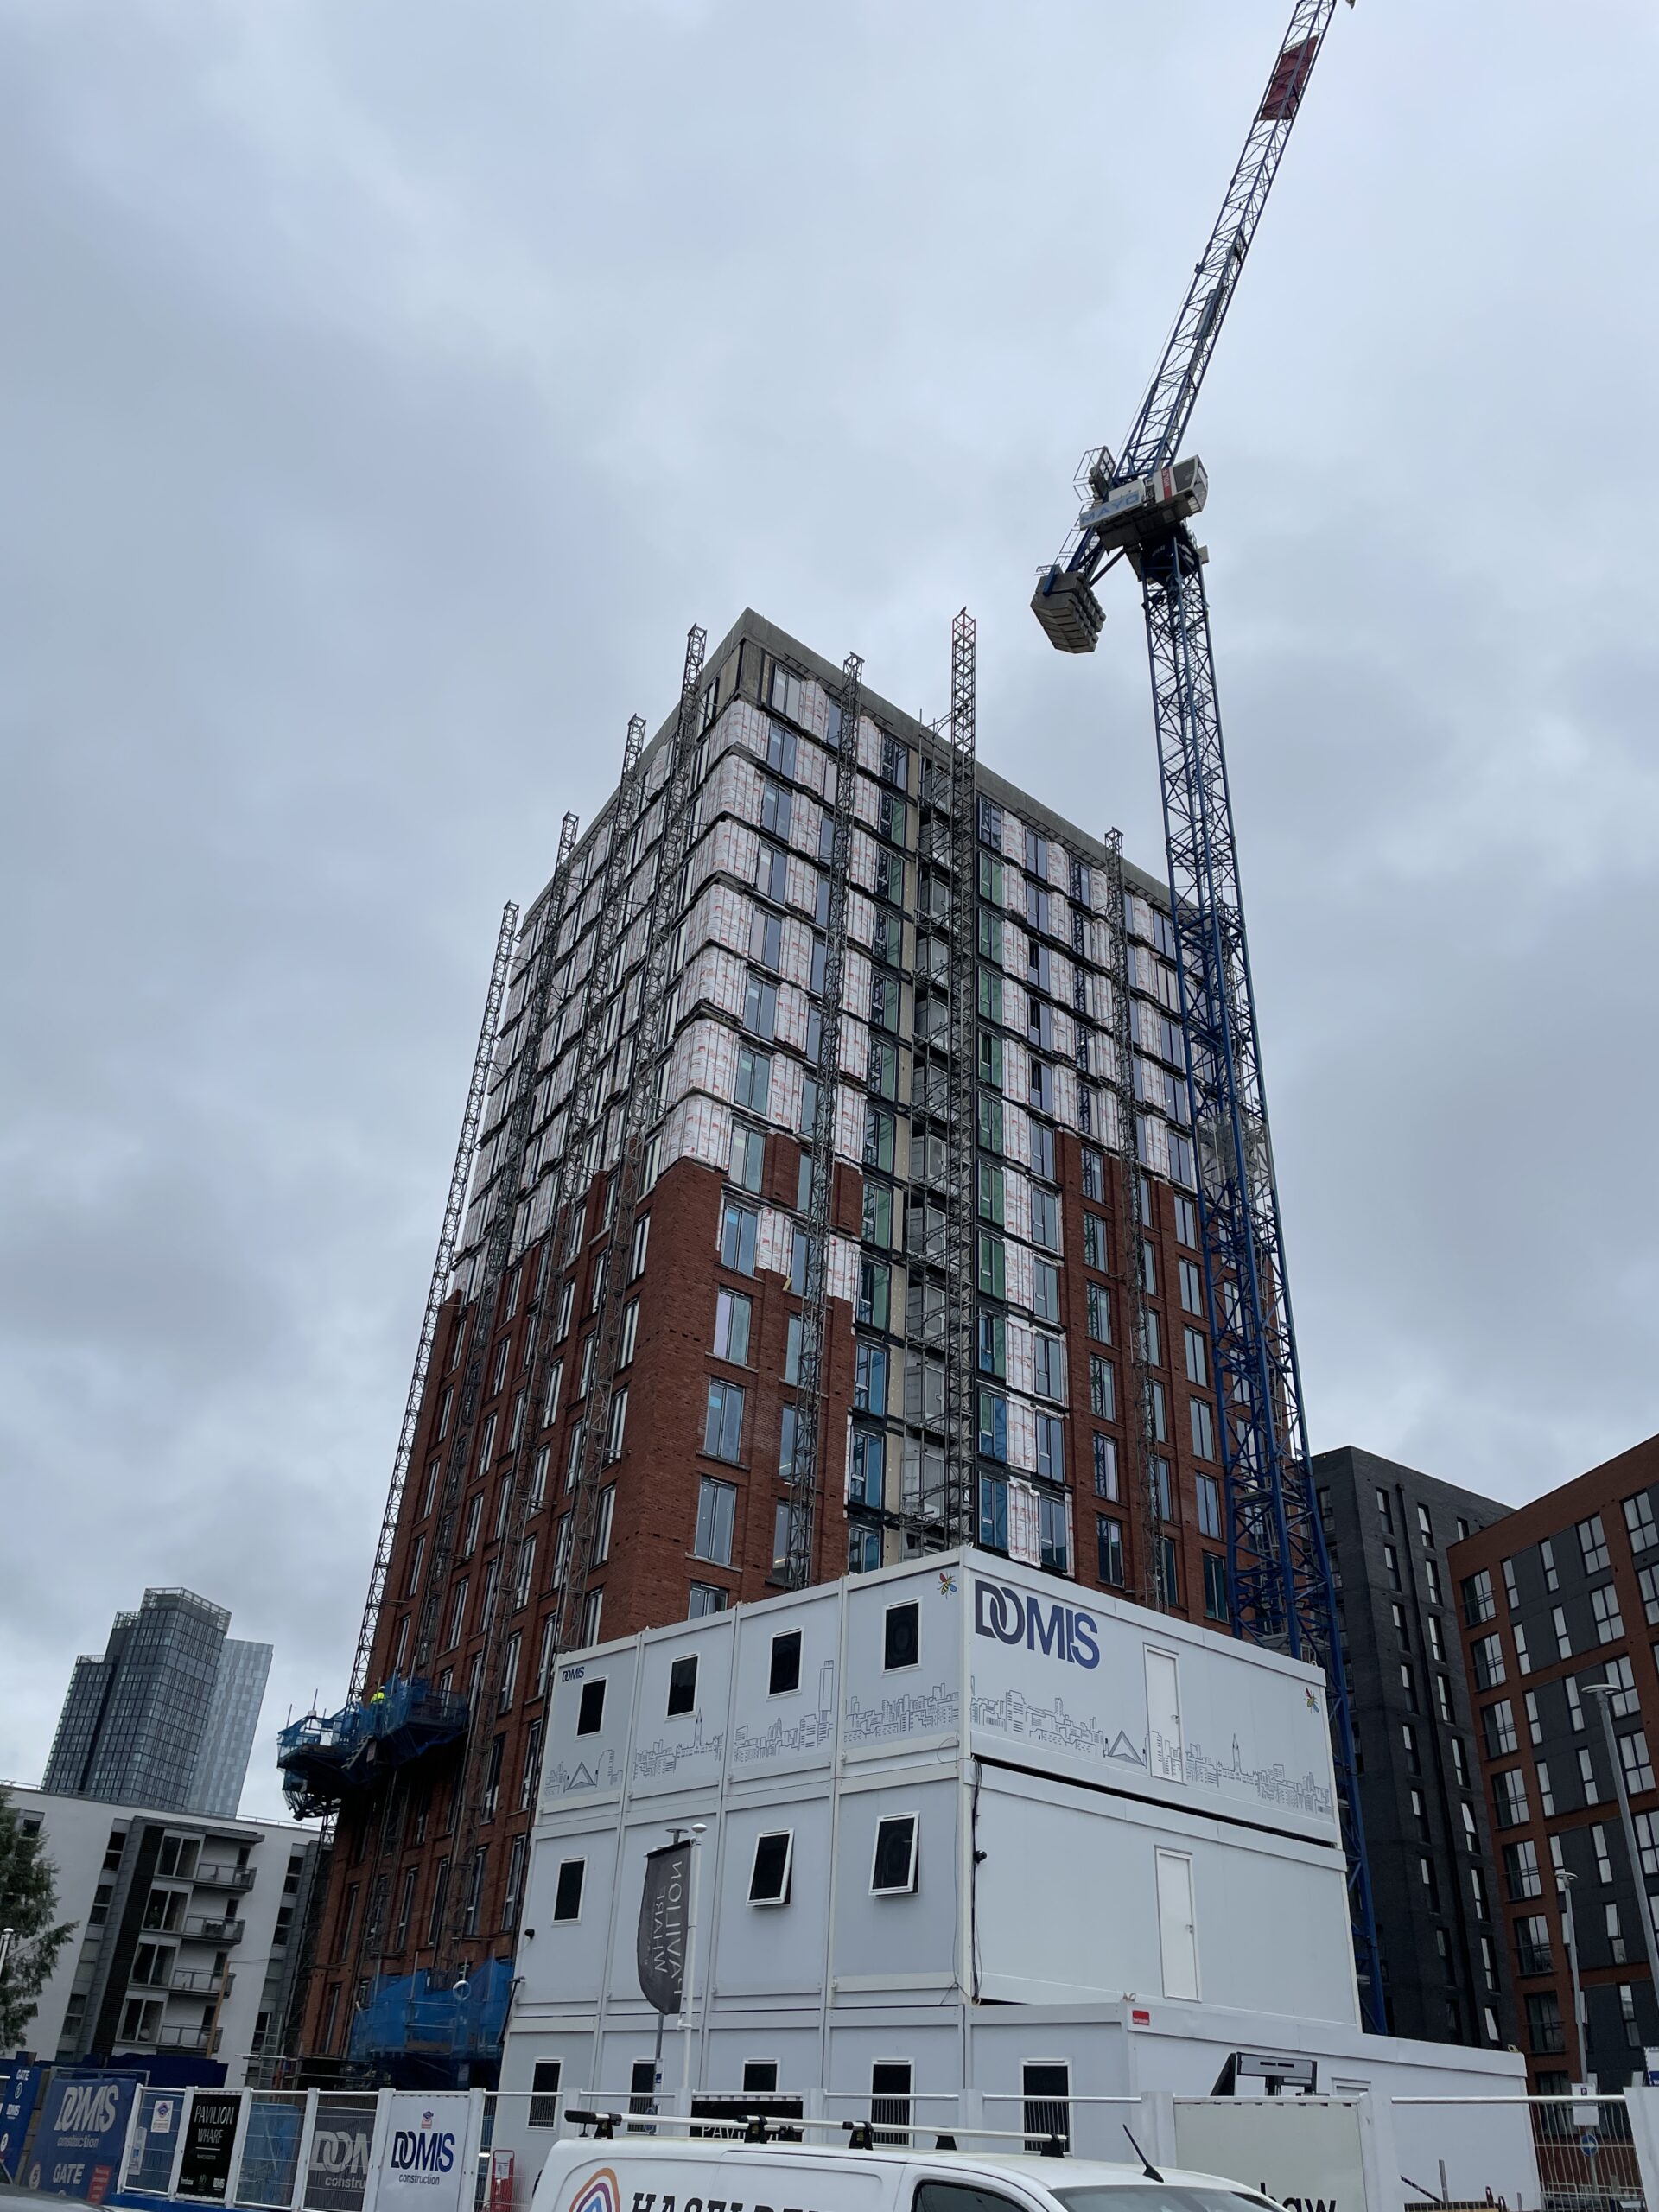 Pavilion Wharf in Salford has topped out